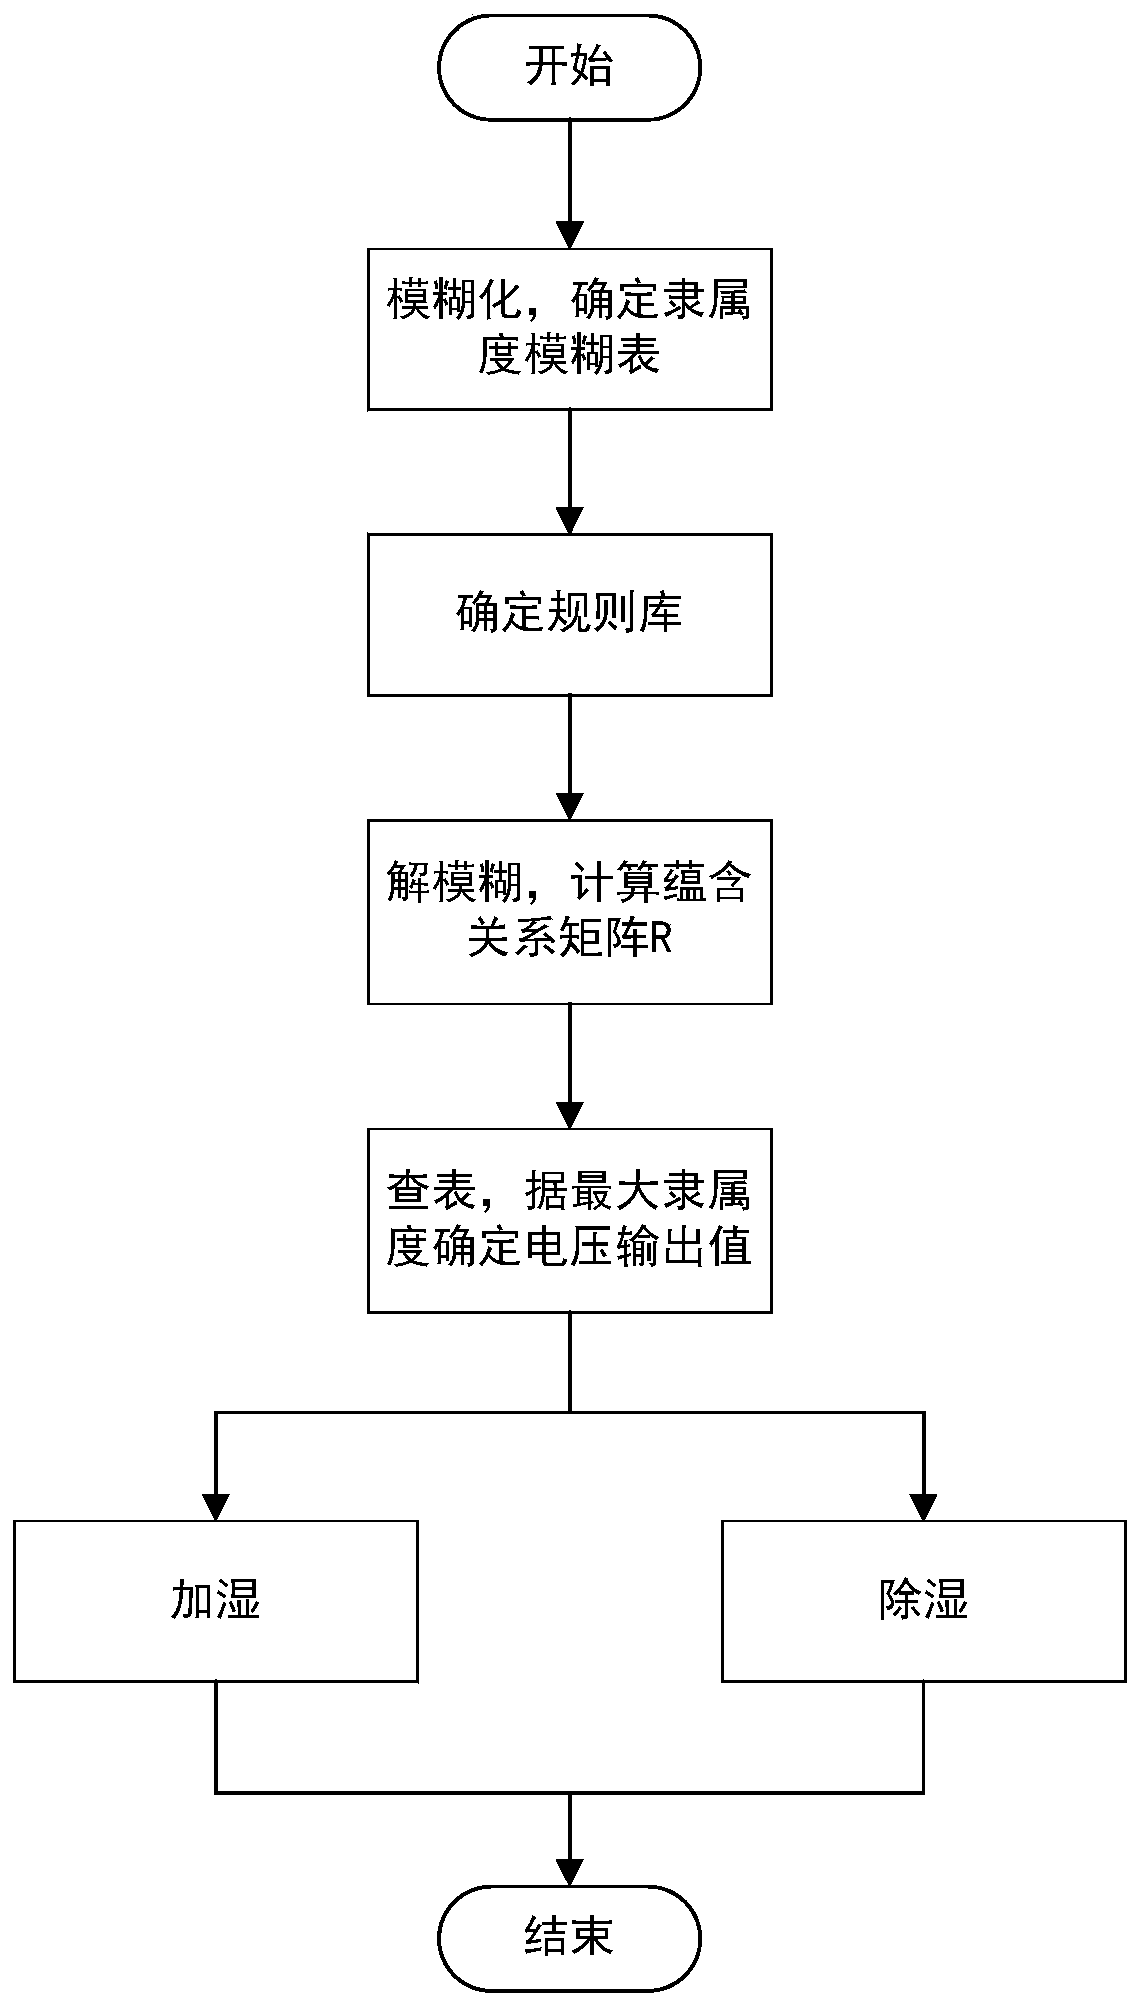 Humidity control method for dehumidification and anti-seepage equipment